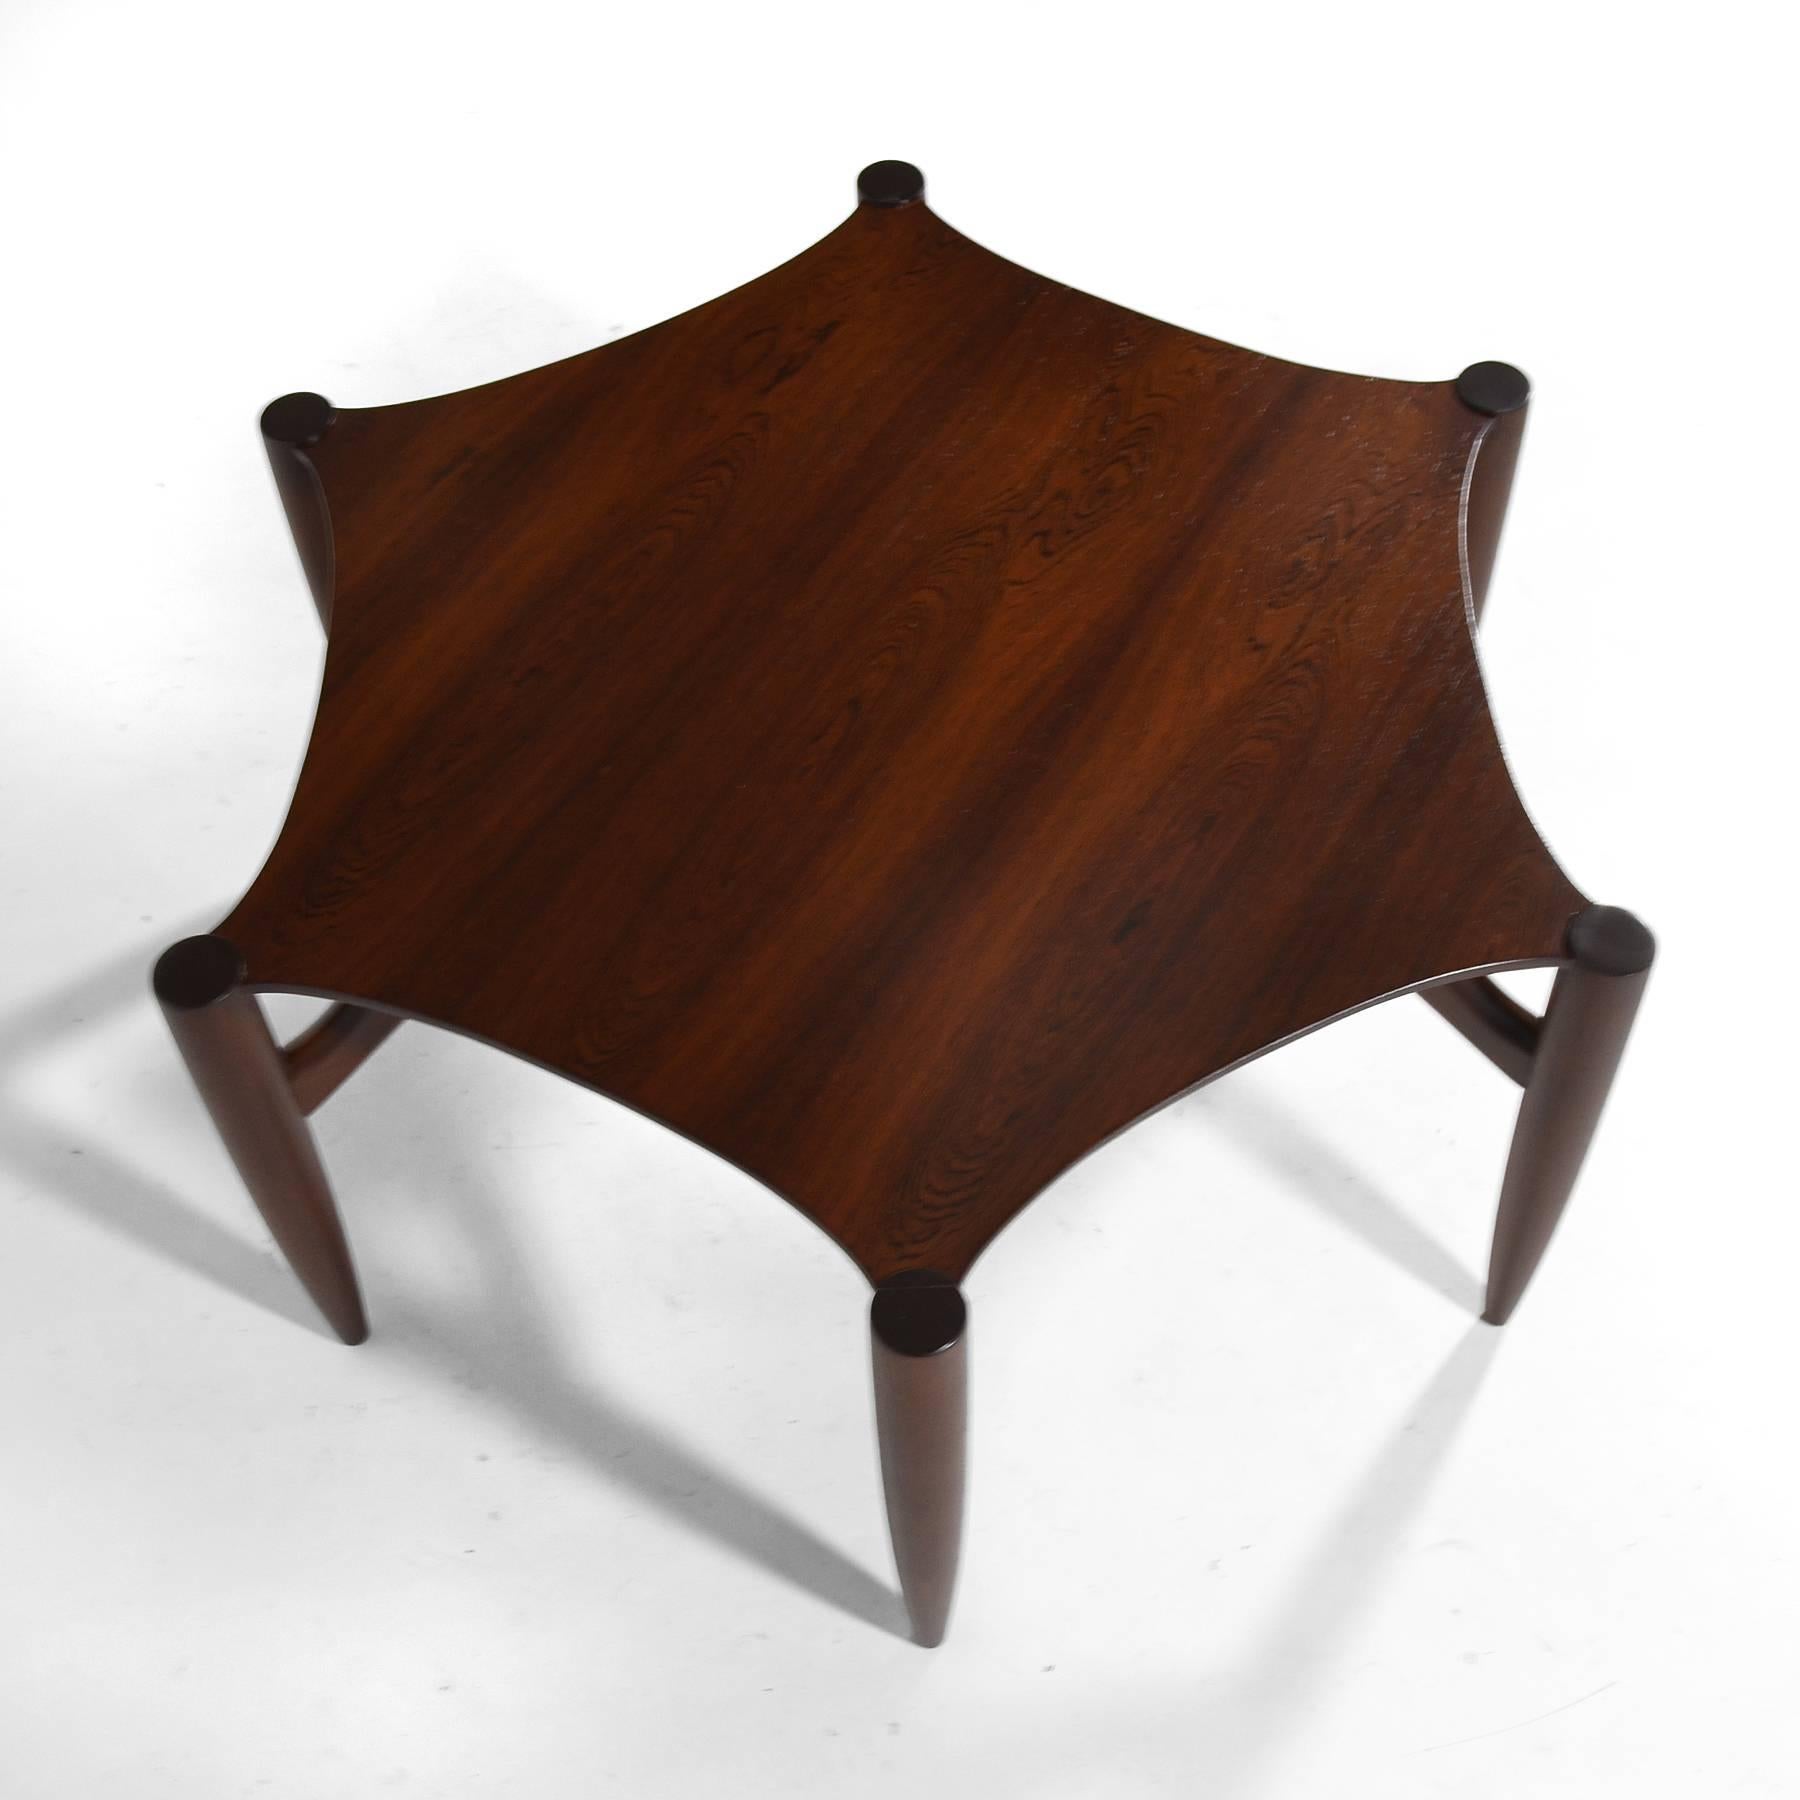 Greta Grossman Rosewood Coffee Table In Excellent Condition For Sale In Highland, IN